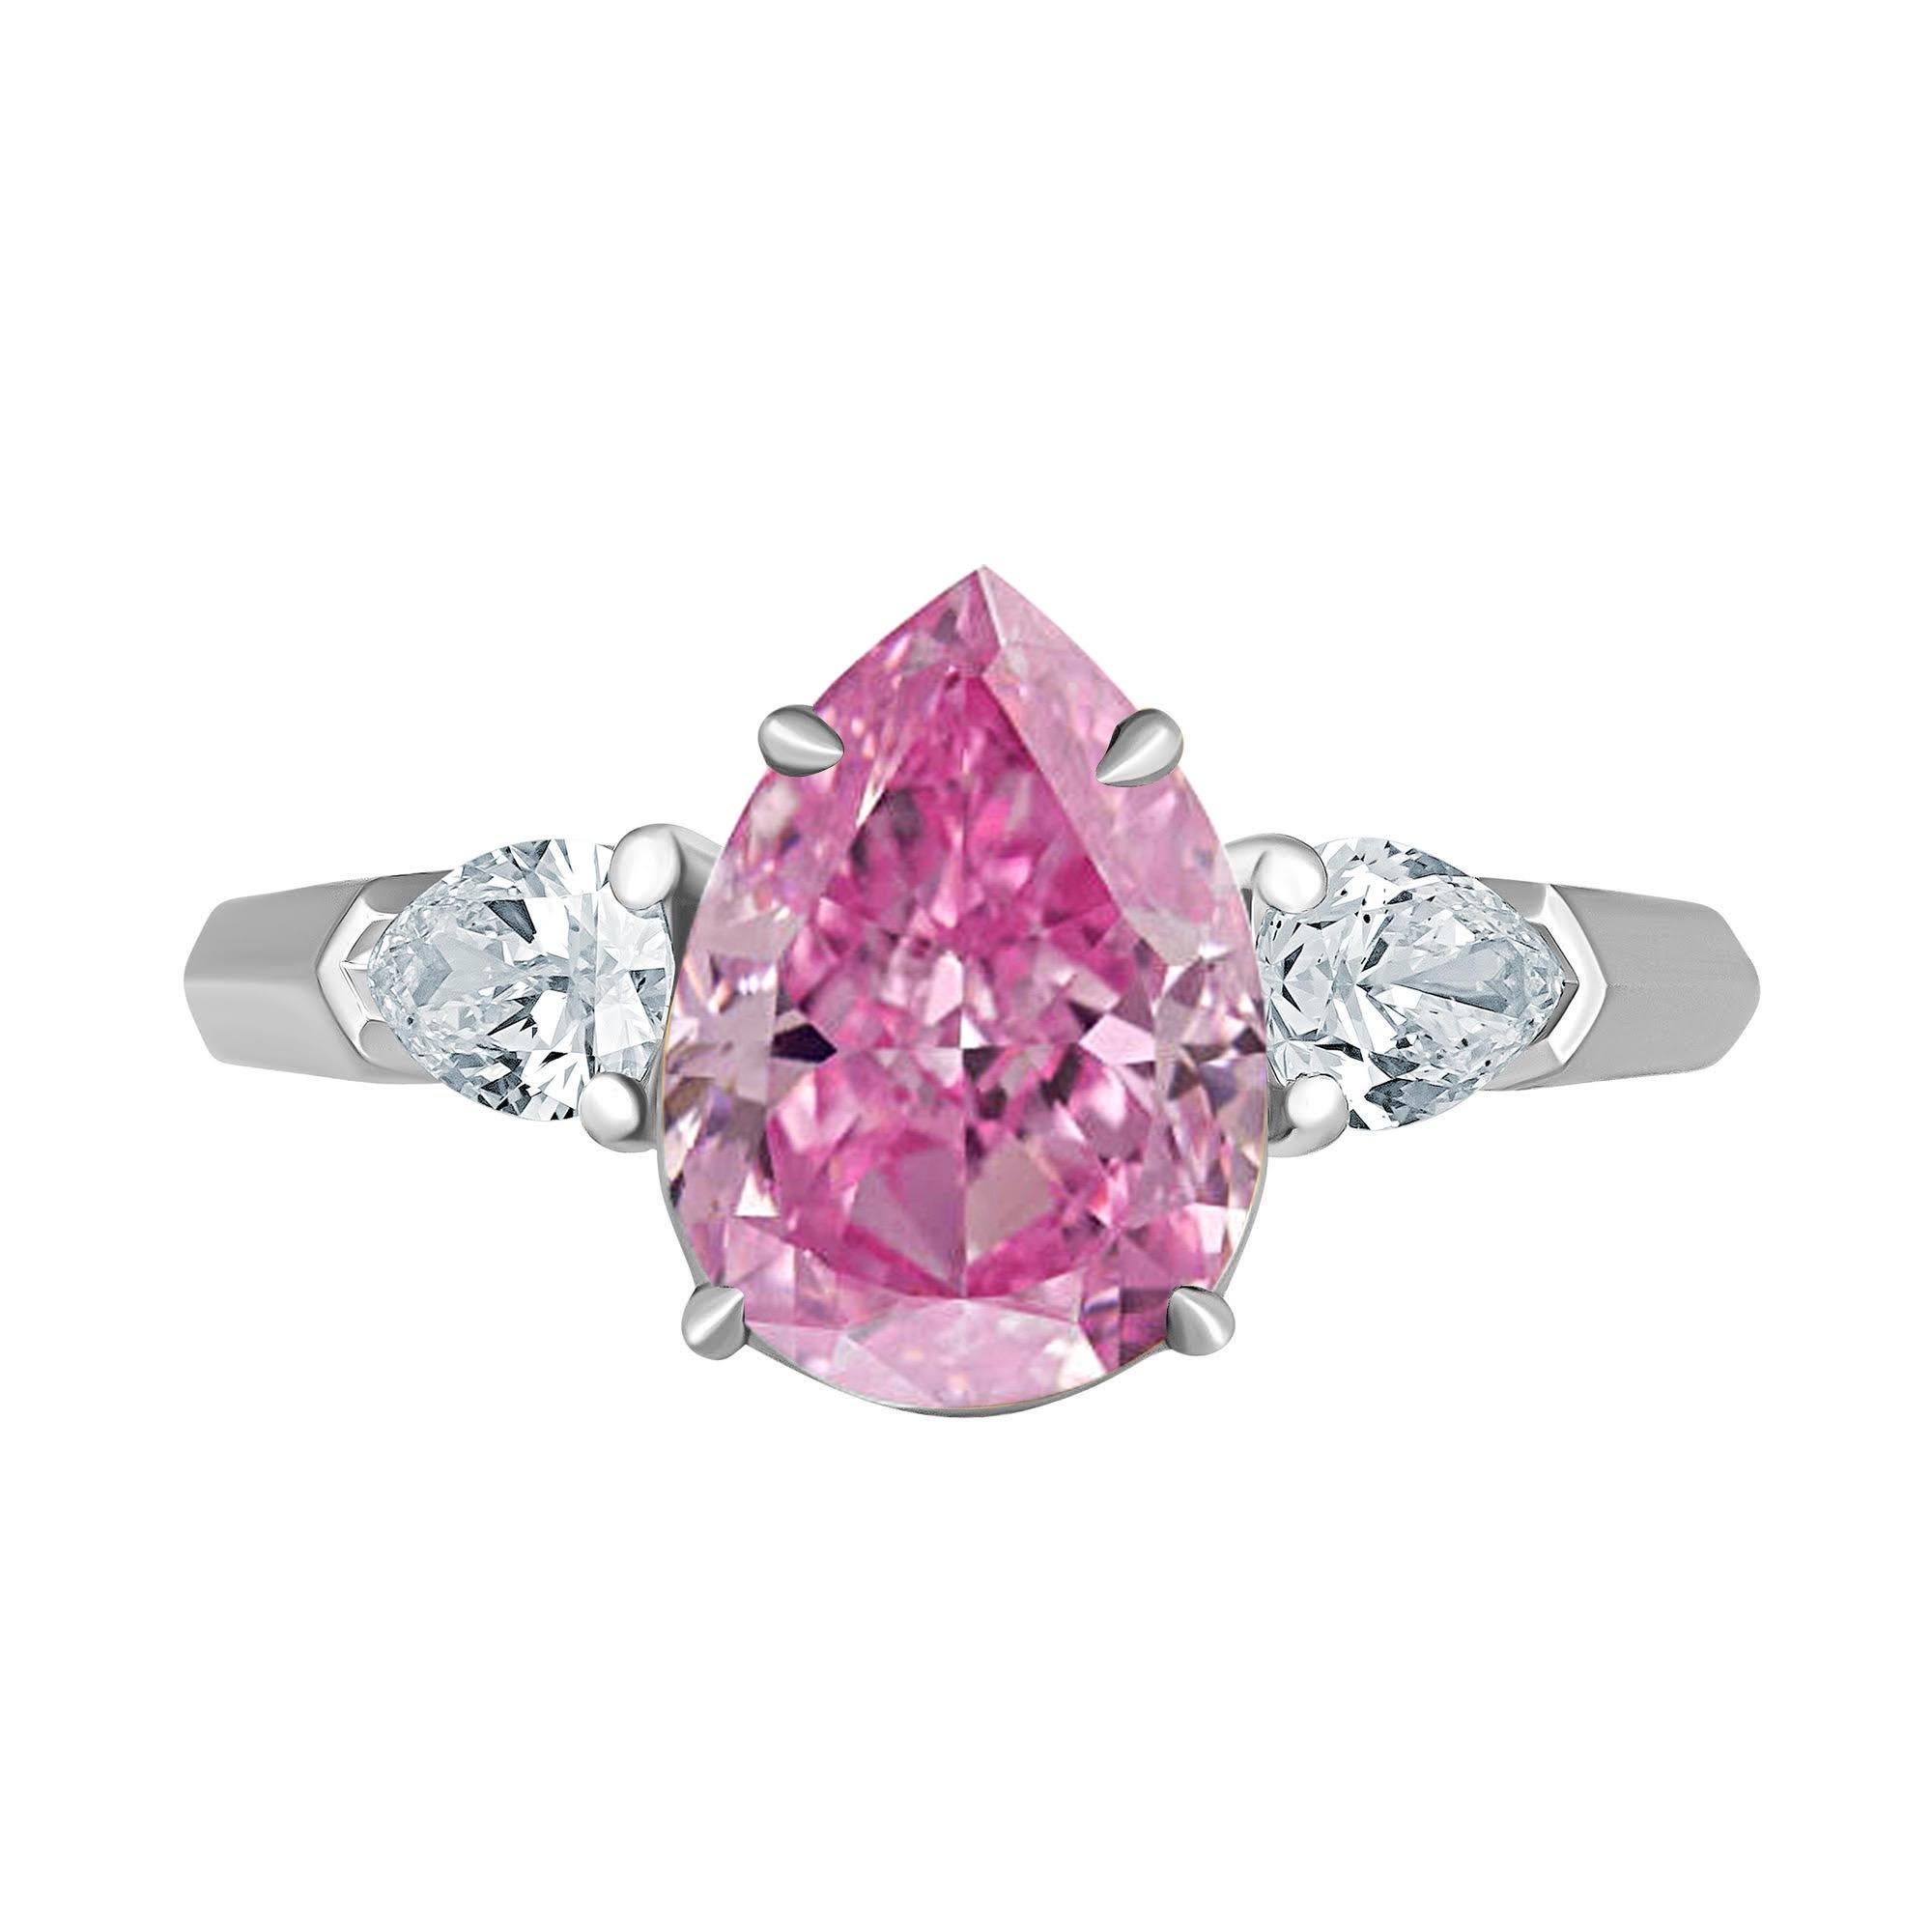 From the Museum vault at Emilio Jewelry, Located On New York’s Iconic Fifth Avenue:
Showcasing a magnificent natural Gia certified natural Fancy Vivid Purplish Pink Pear shape diamond Set in Platinum. This ultra rare center stone has an ultra sweet